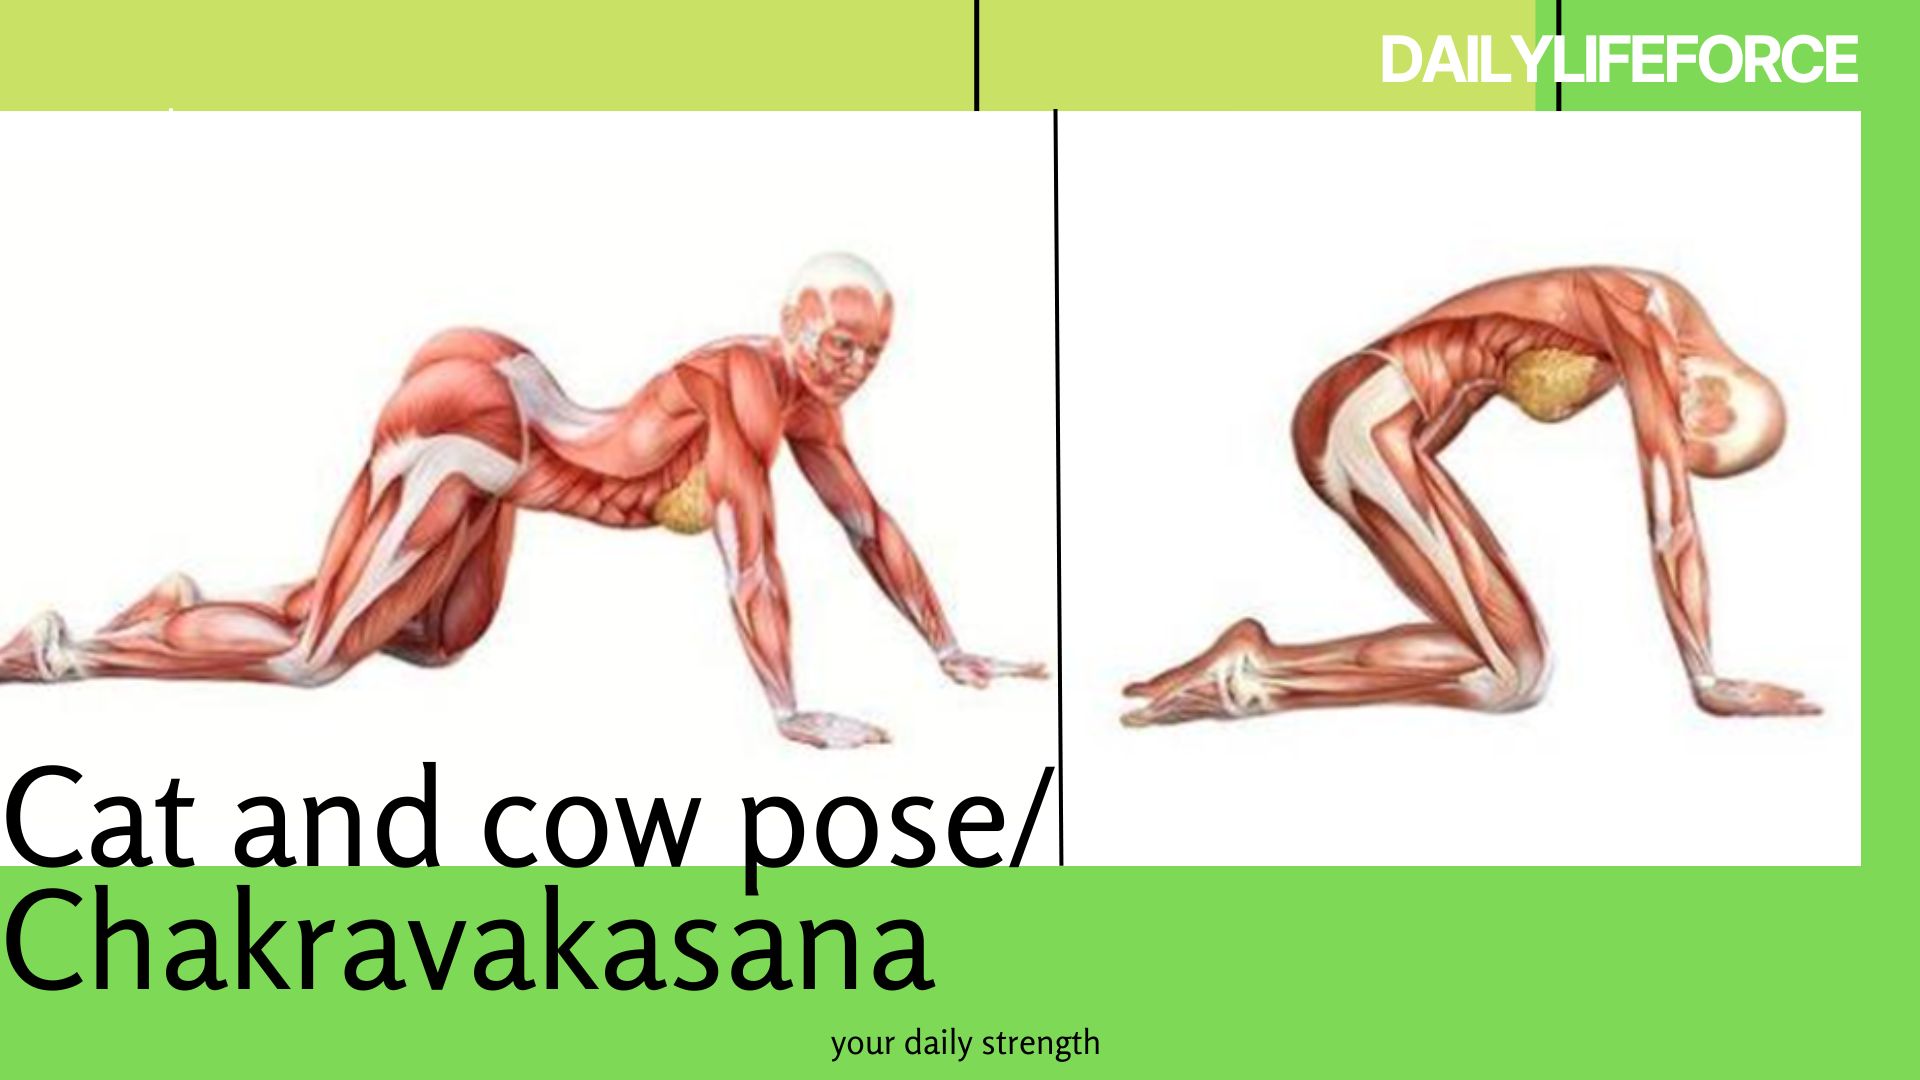 Cat and cow pose